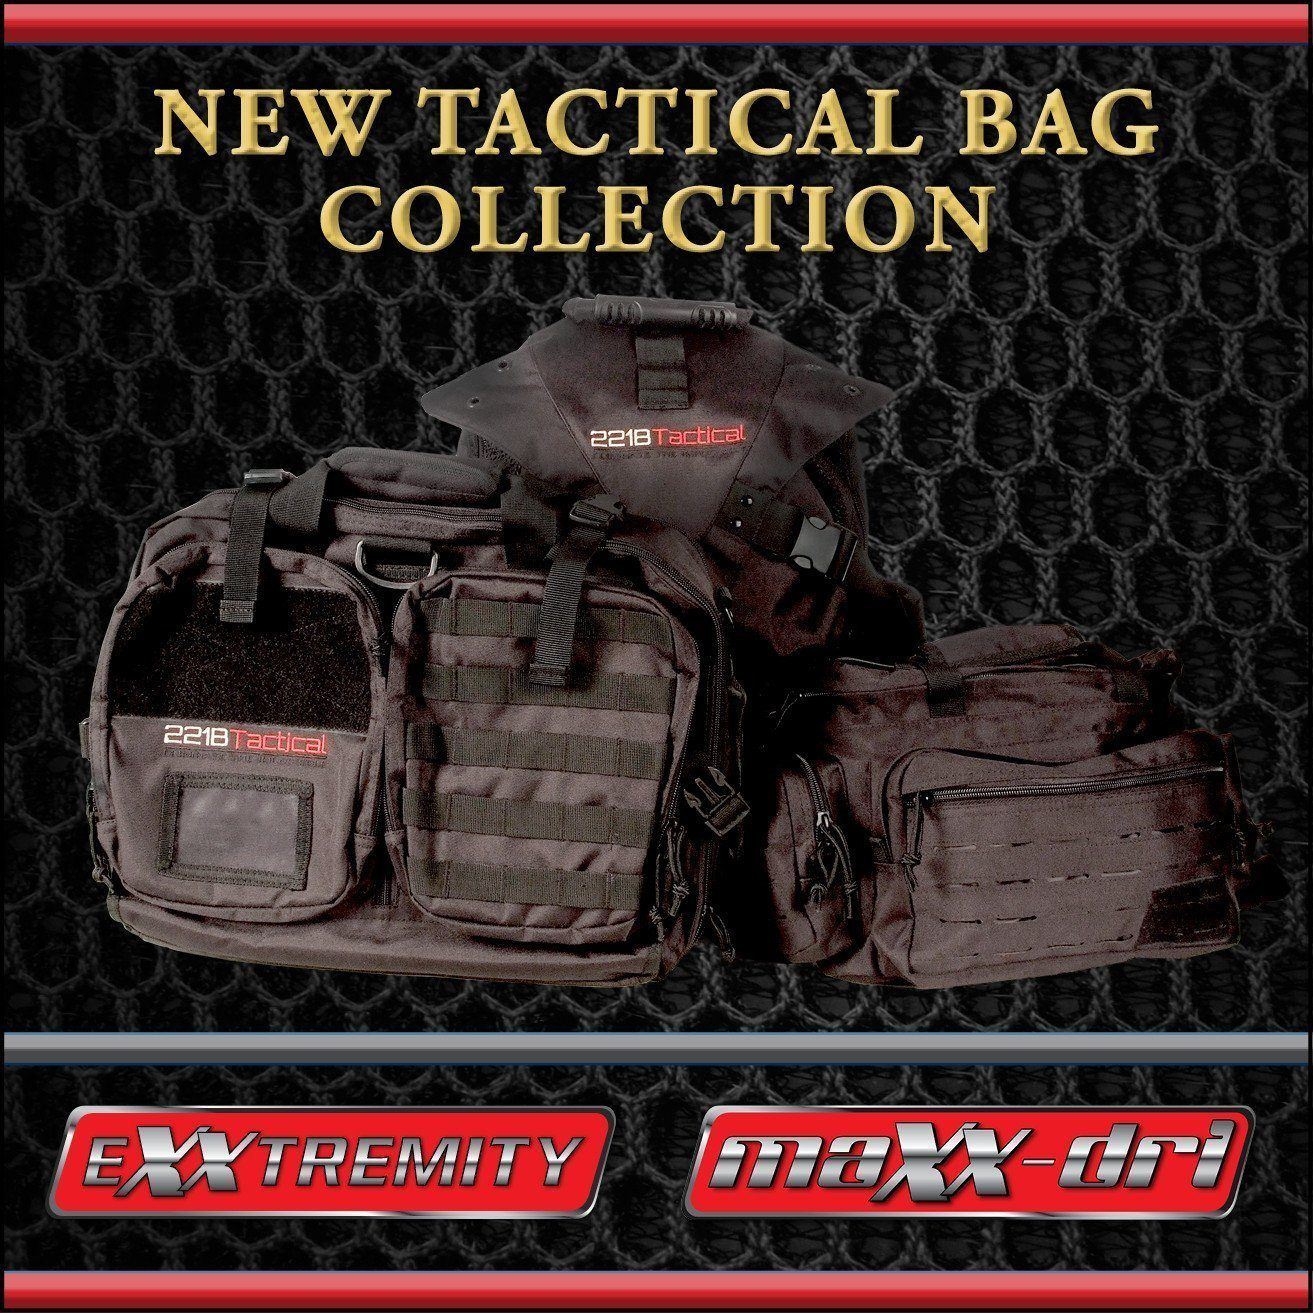 Why are most "tactical" bags NOT tactical at all??  And why are "patrol bags" terrible for patrol?  Isn't it time that the bags that carry your gear be just as reliable as your gear itself?